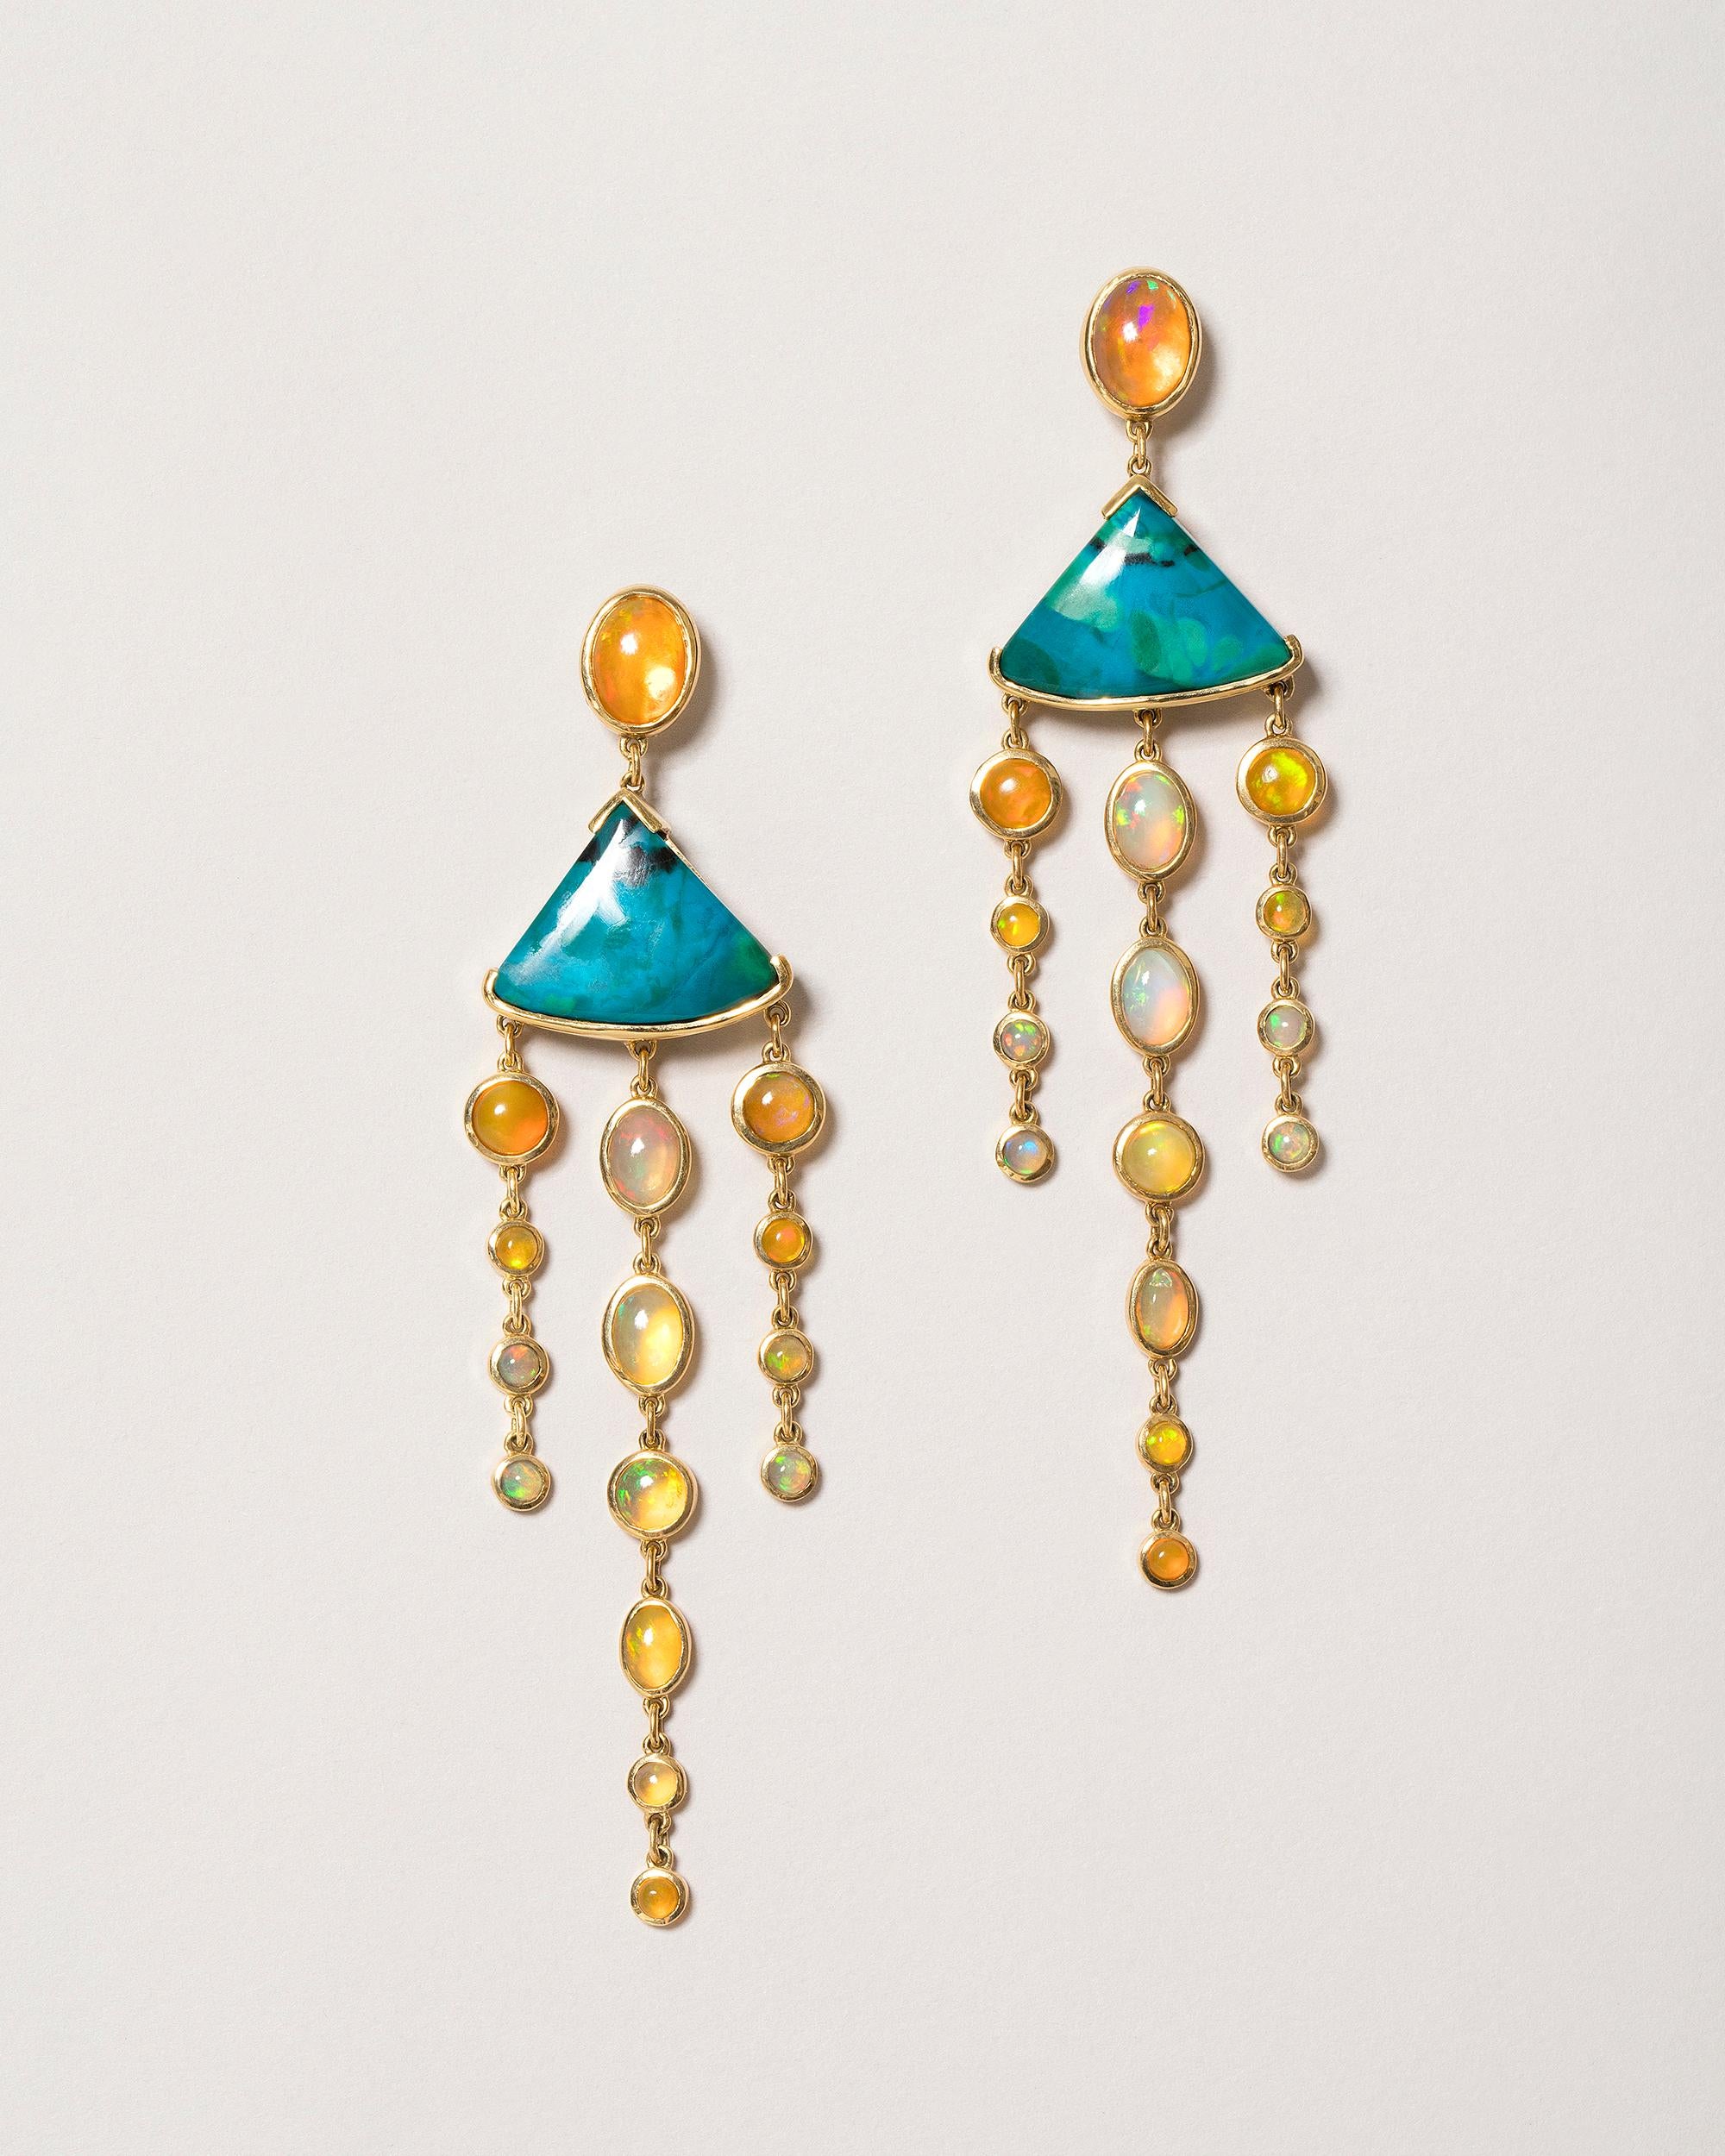 One of a kind earrings
2 chrysocolla cabochons have a total gem weight of 15.03ct

30 Ethiopian opals have a total gem weight of 8.58ct

Set in 18k yellow gold